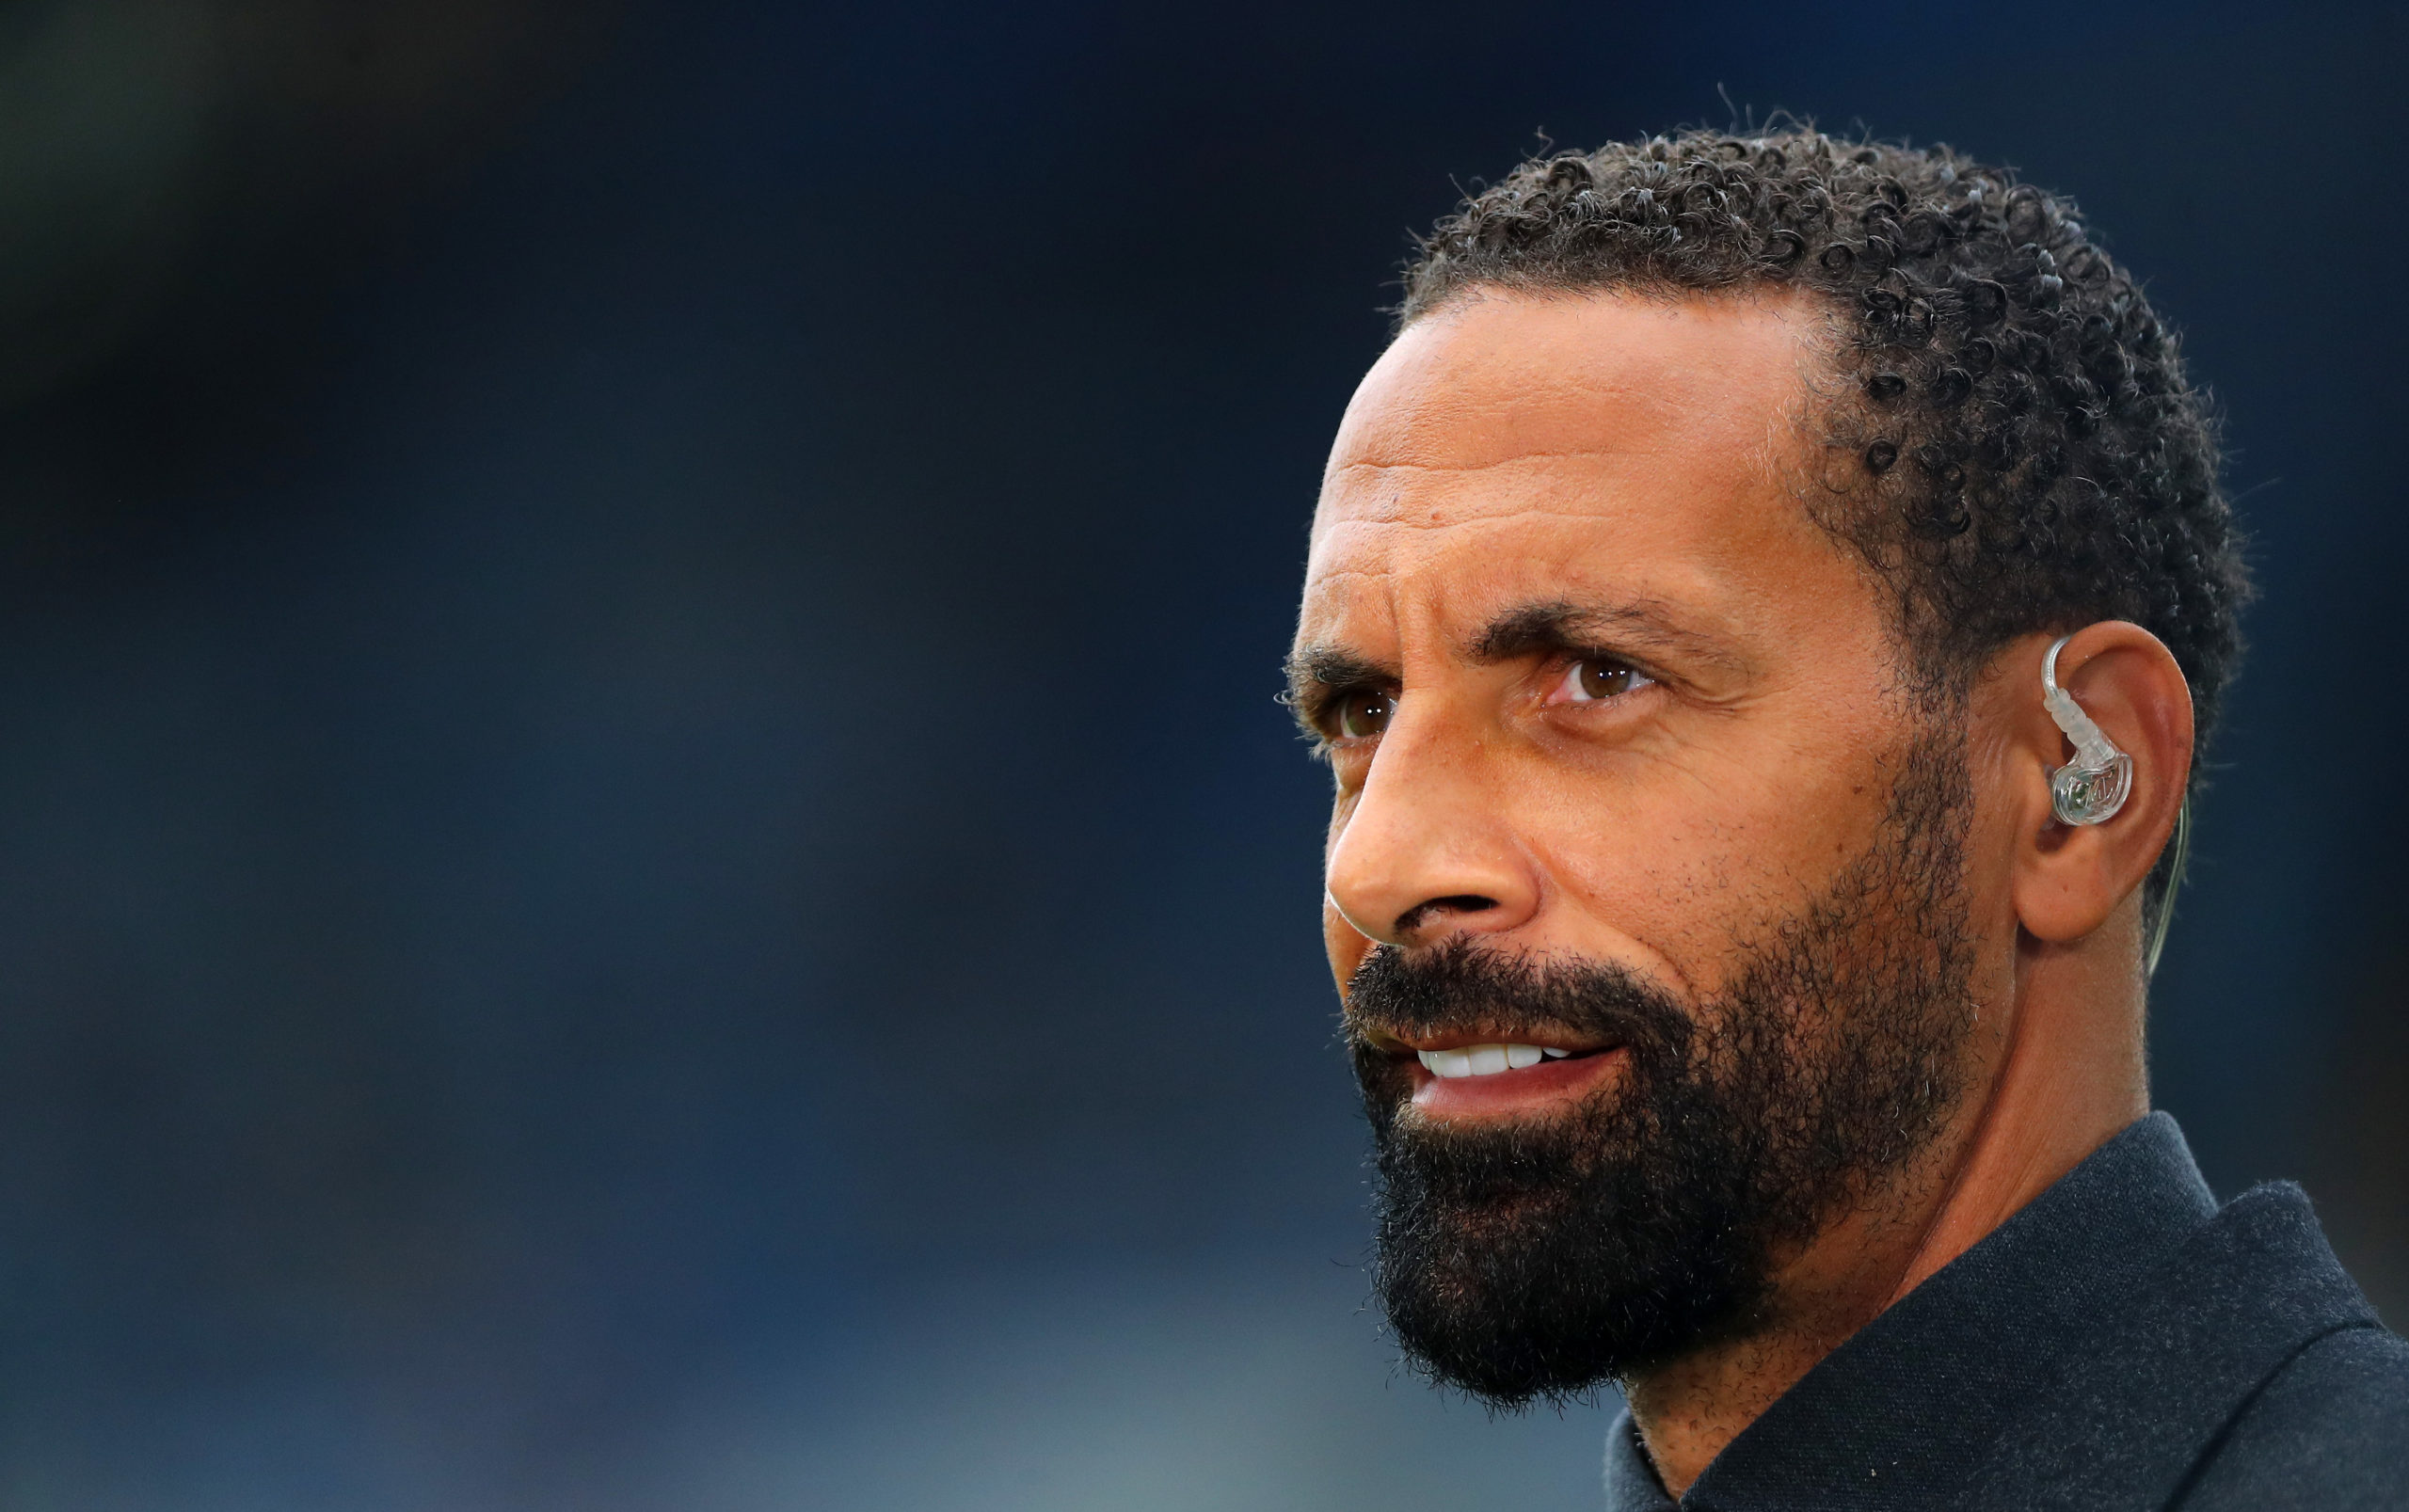 'Easy': Rio Ferdinand says he would've loved to have played with £22m Chelsea player